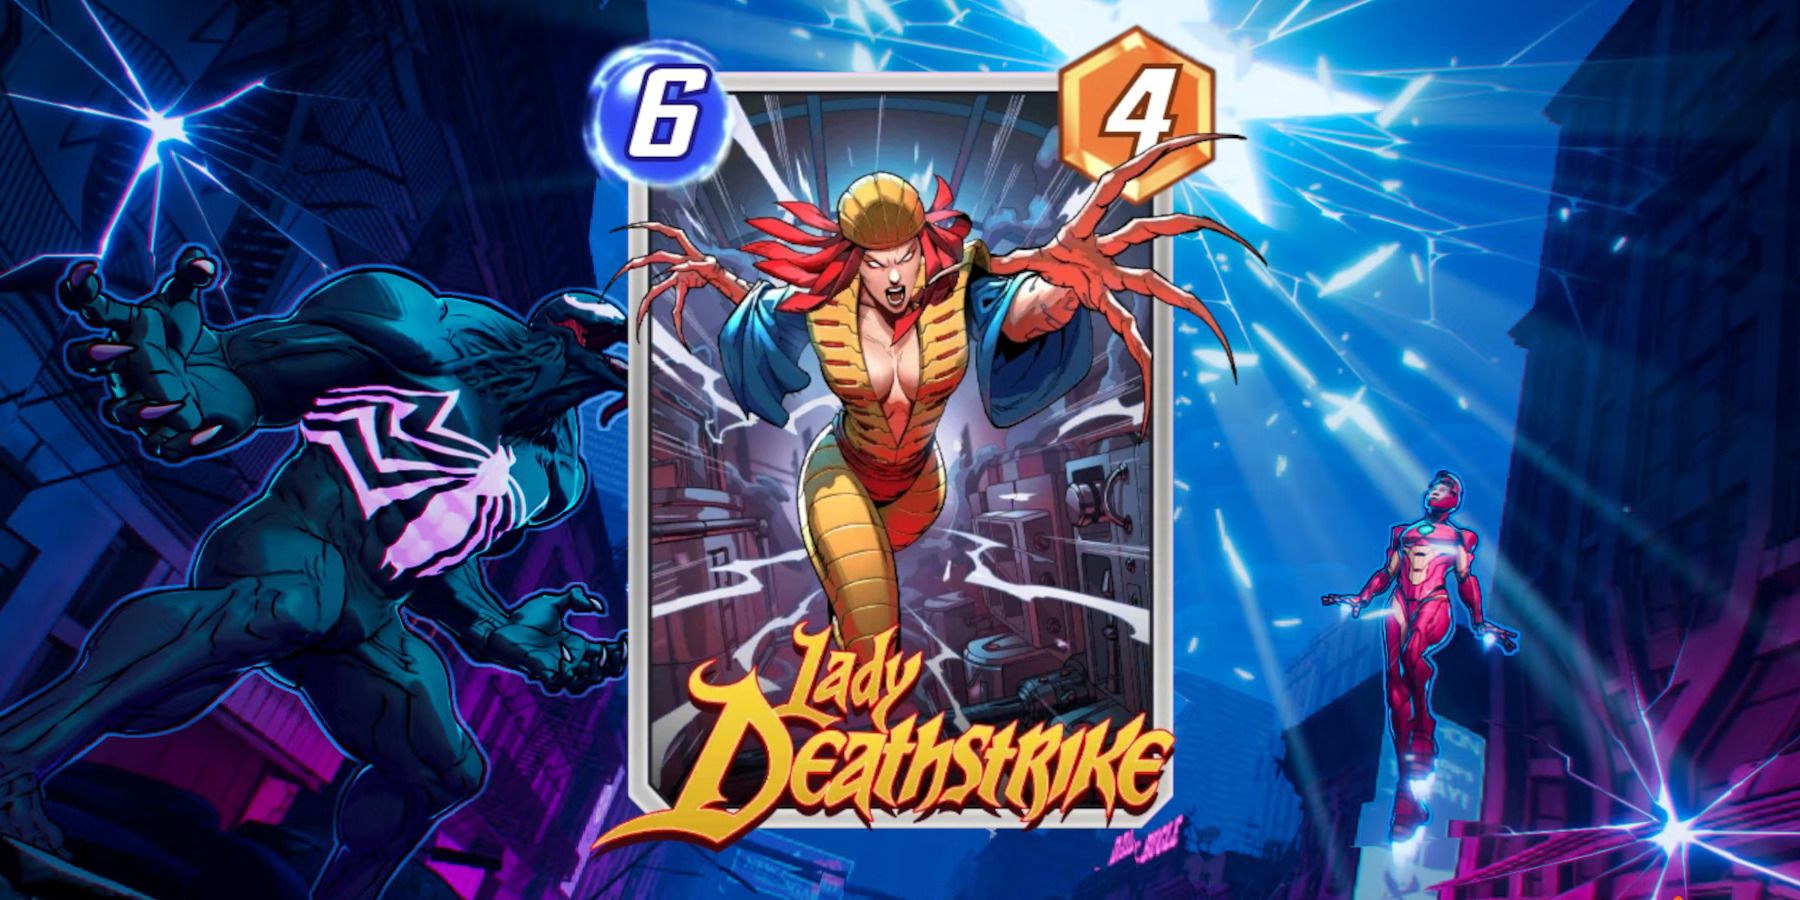 The Lady Deathstrike card in Marvel Snap on top of promotional art for the game